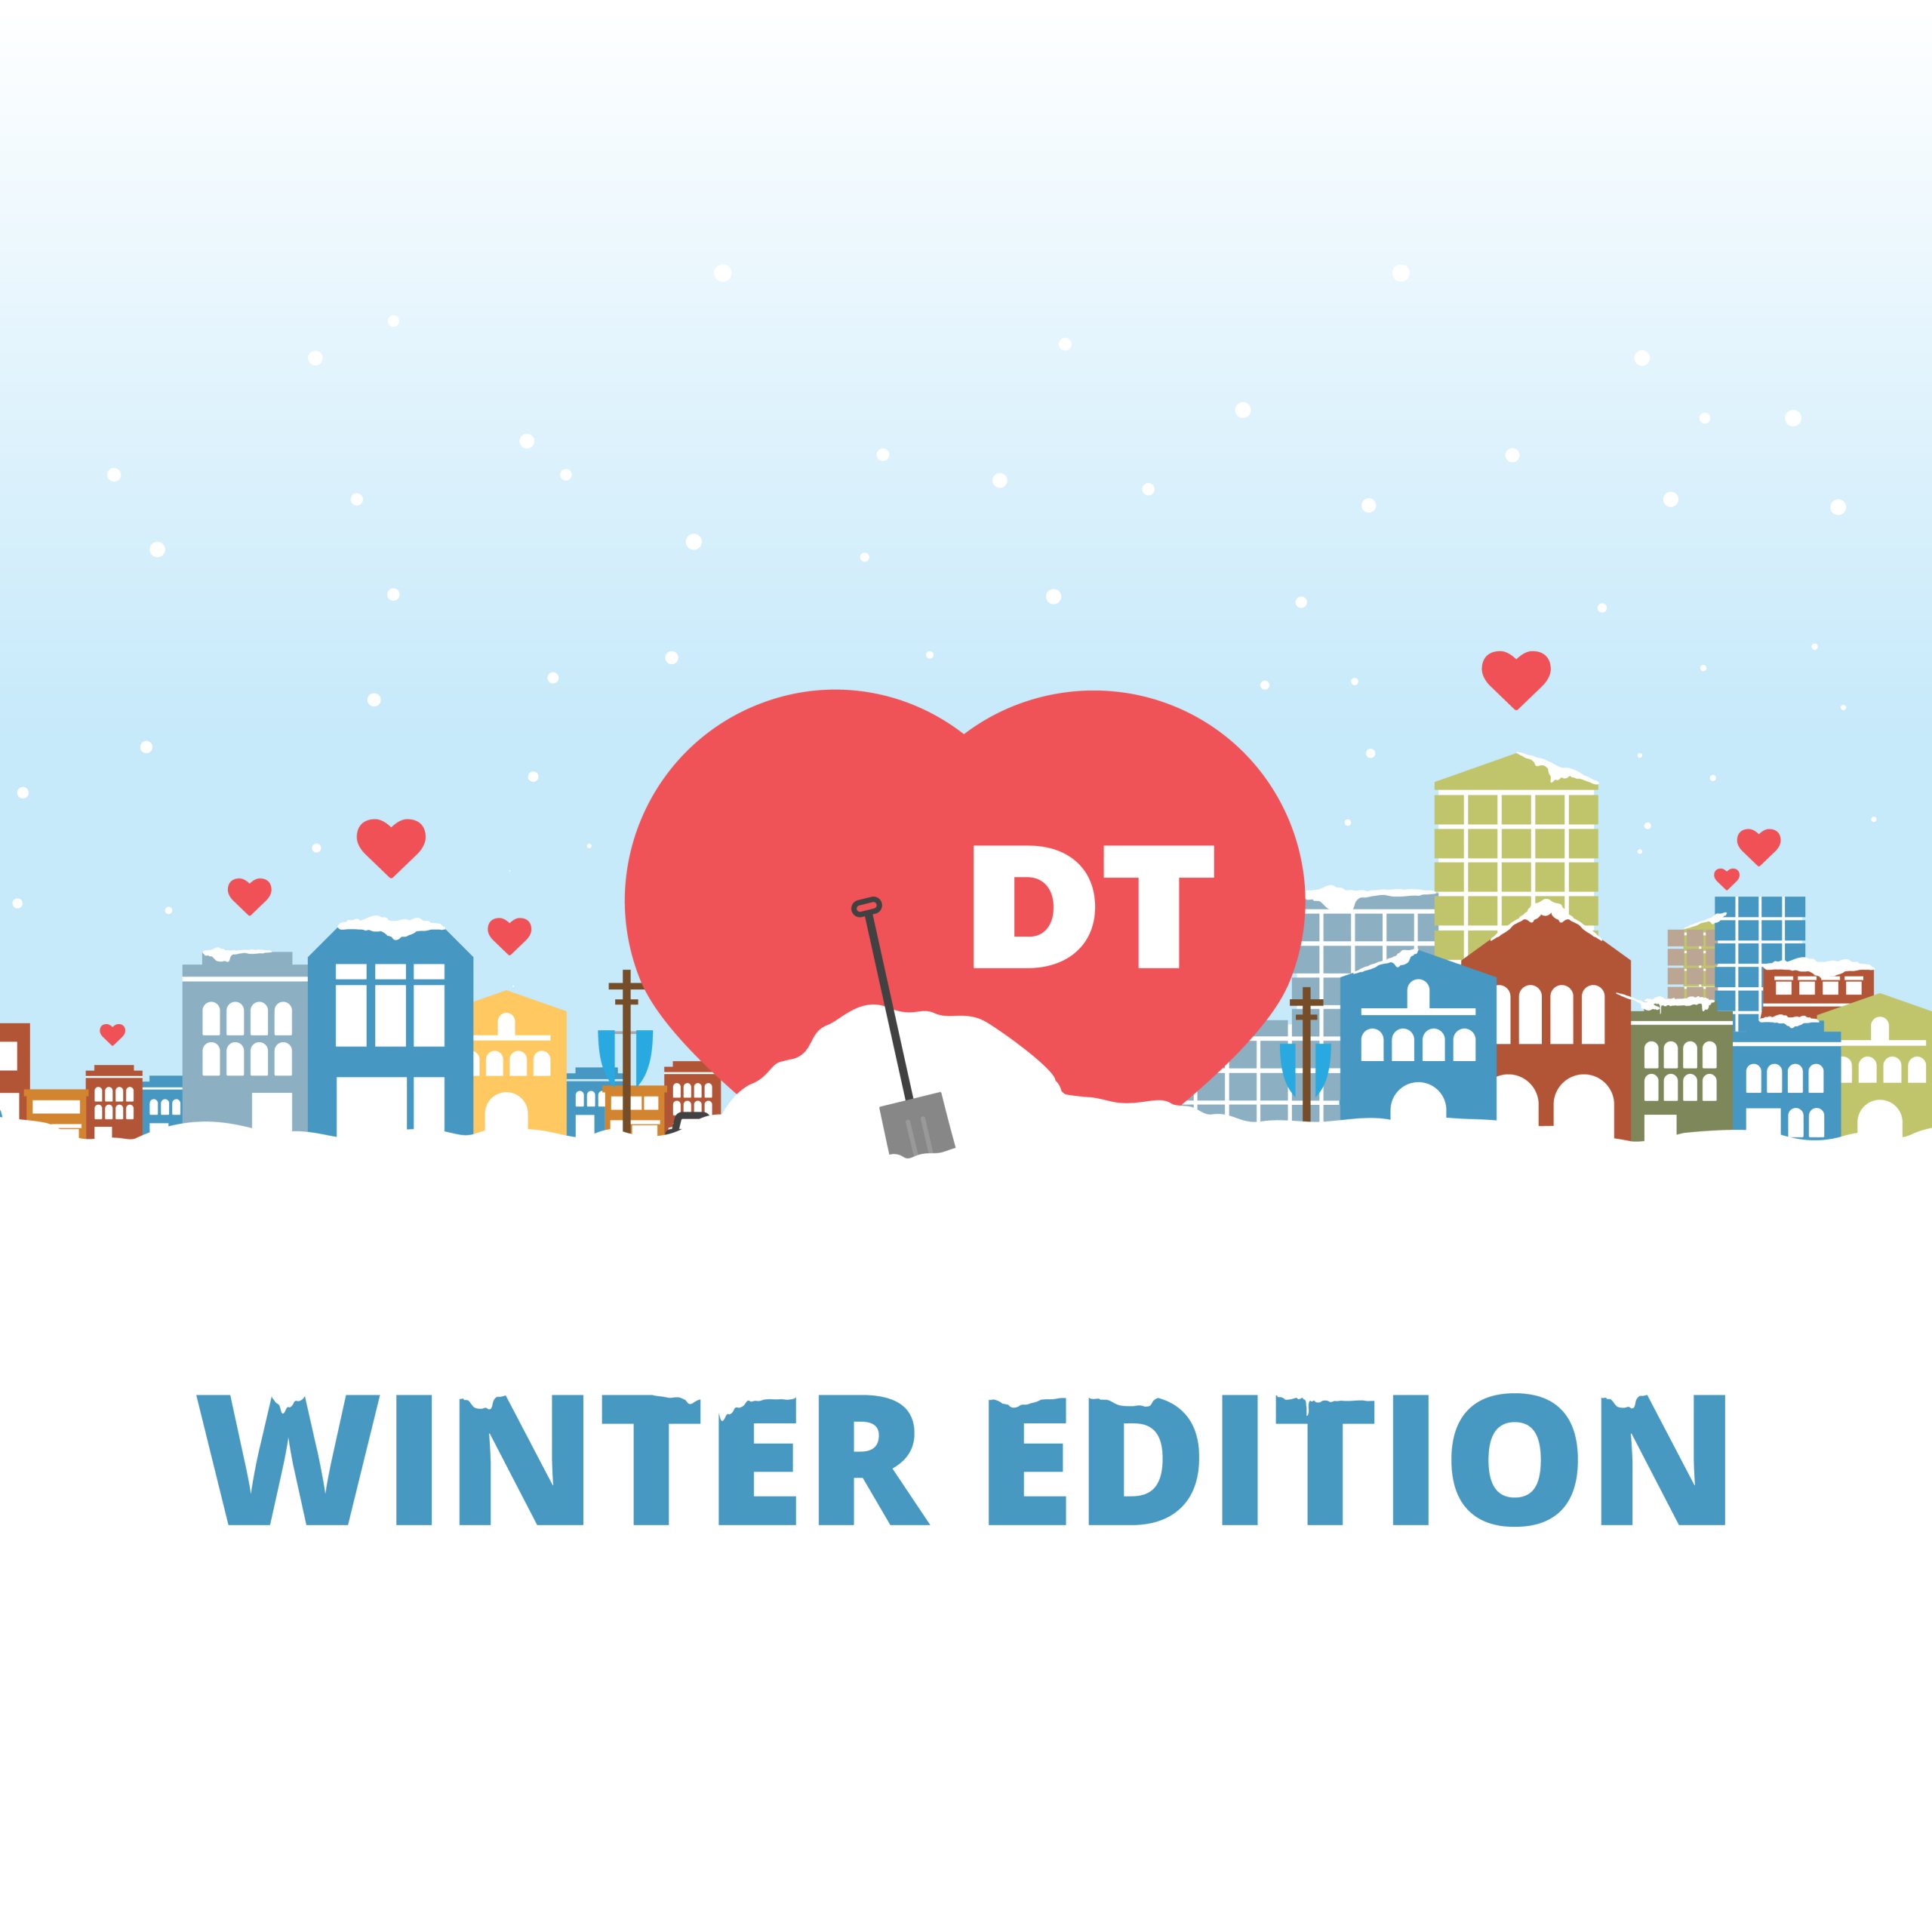 #LoveDowntown #Snowmageddon 2020 Winter Edition Contest January 25 to March 20, 2020